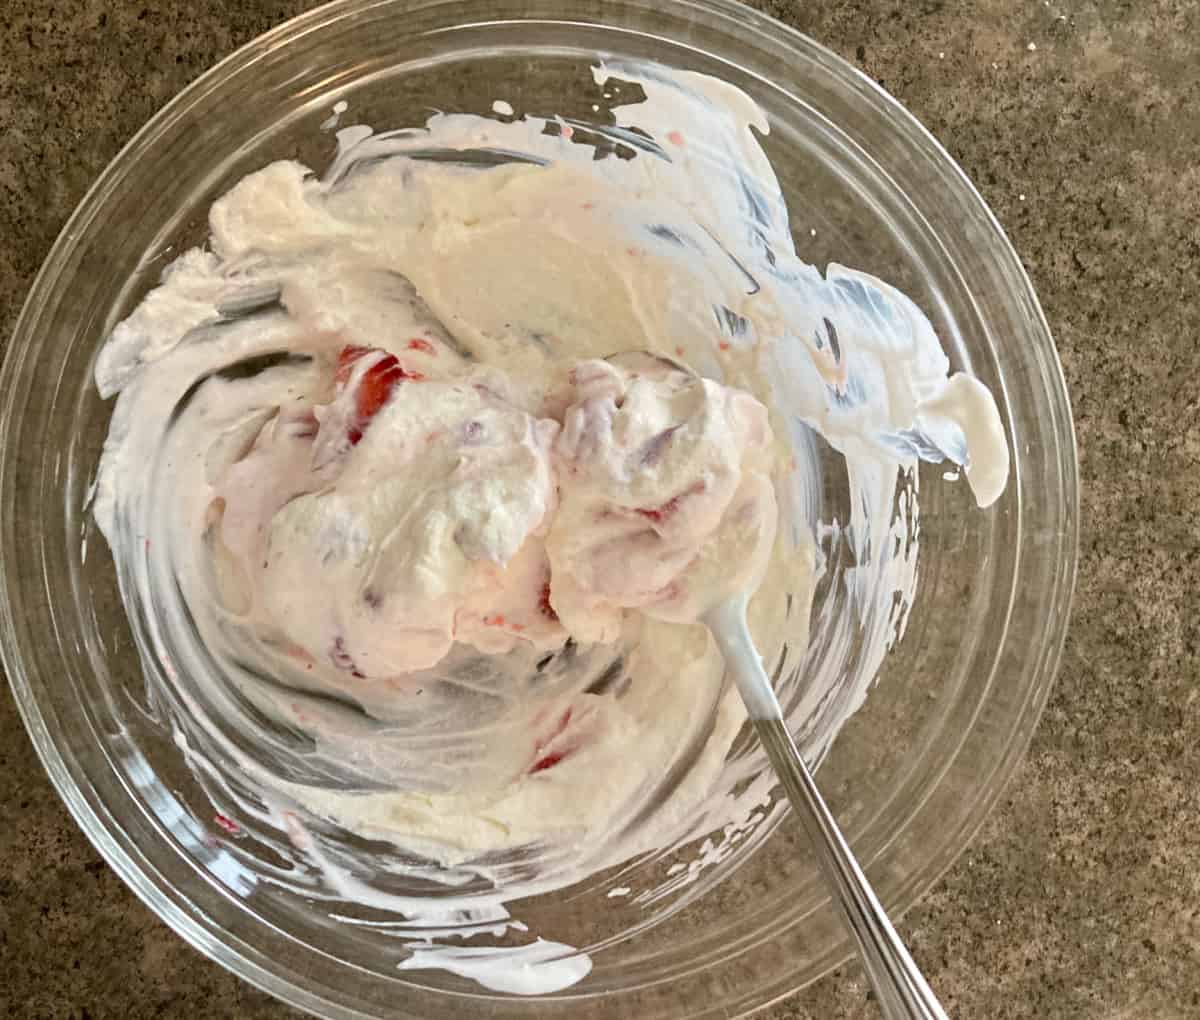 Mixing strawberries, yogurt and lite whipped topping in glass bowl with spoon.